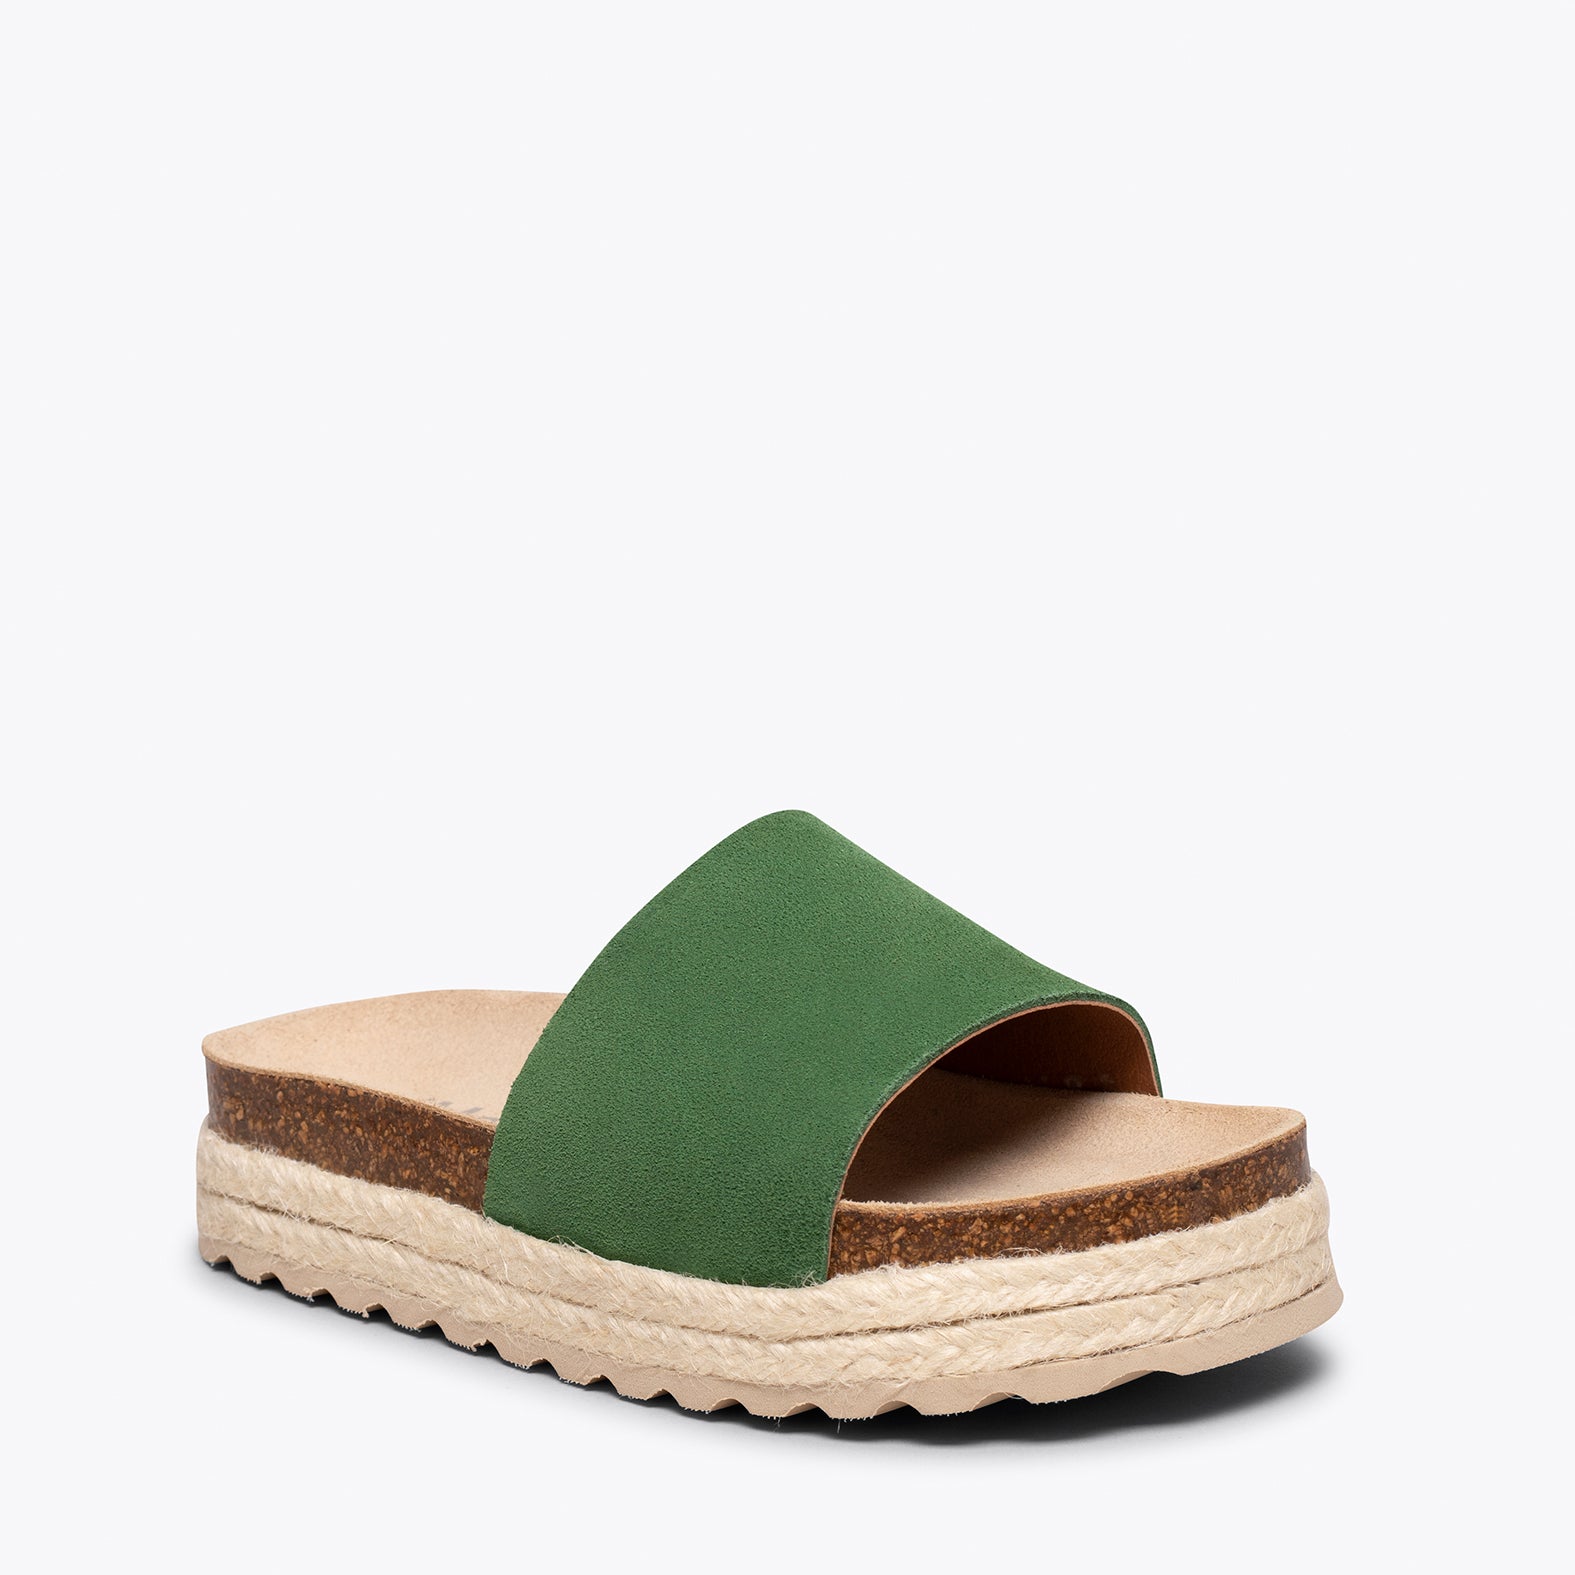 STRAWBERRY – GREEN flat sandals for girls